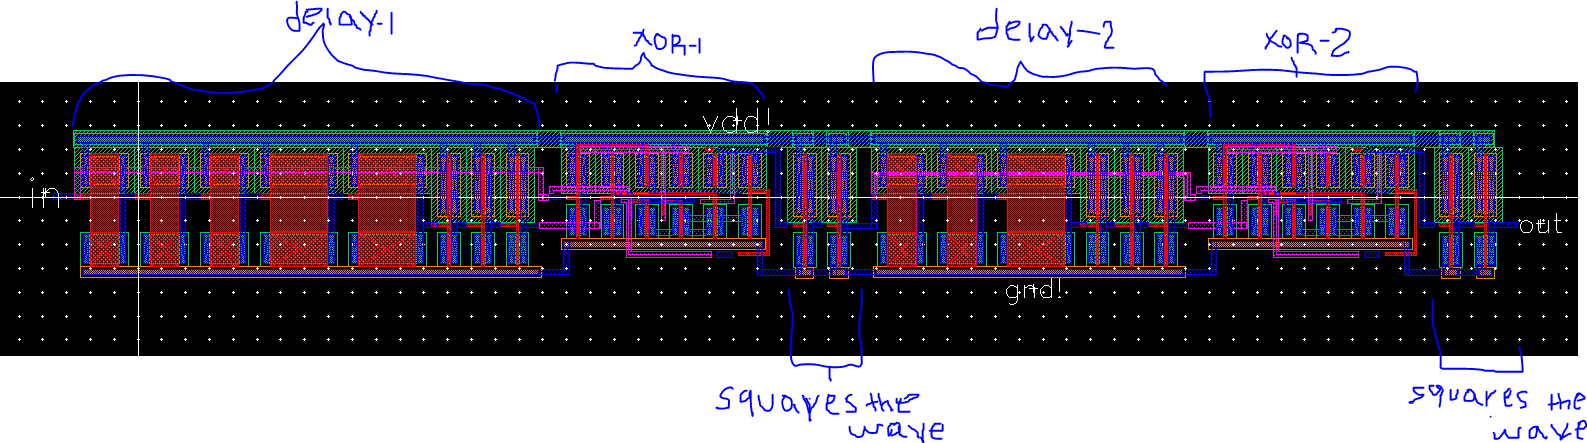 Lab_final/layout/freq_mult_lay.PNG